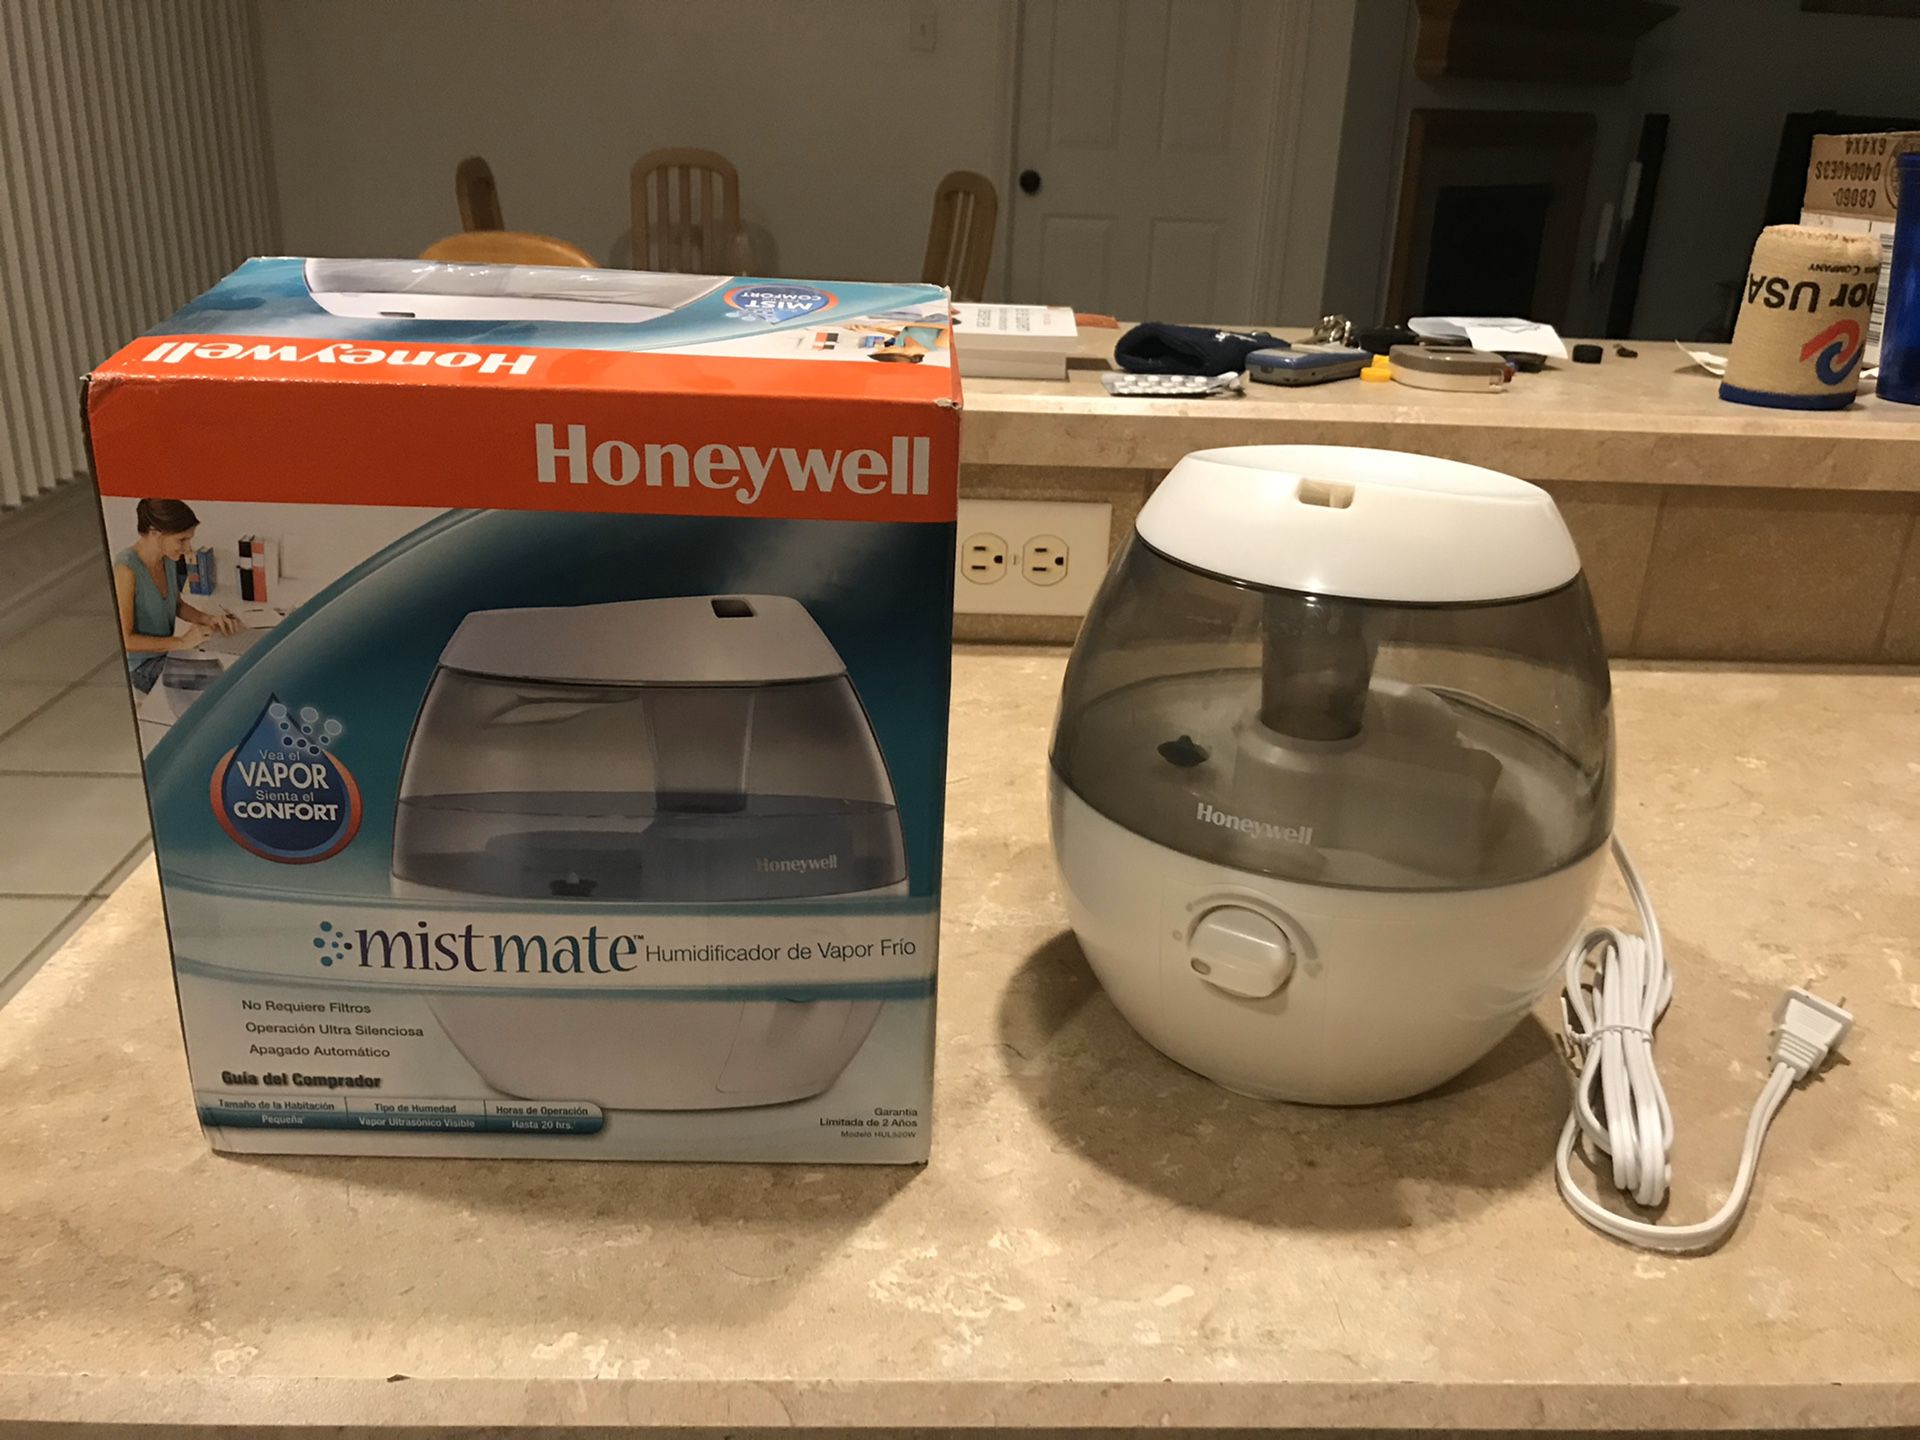 Cold Mist Humidifier ( 1gal) - very silent , Honeywell